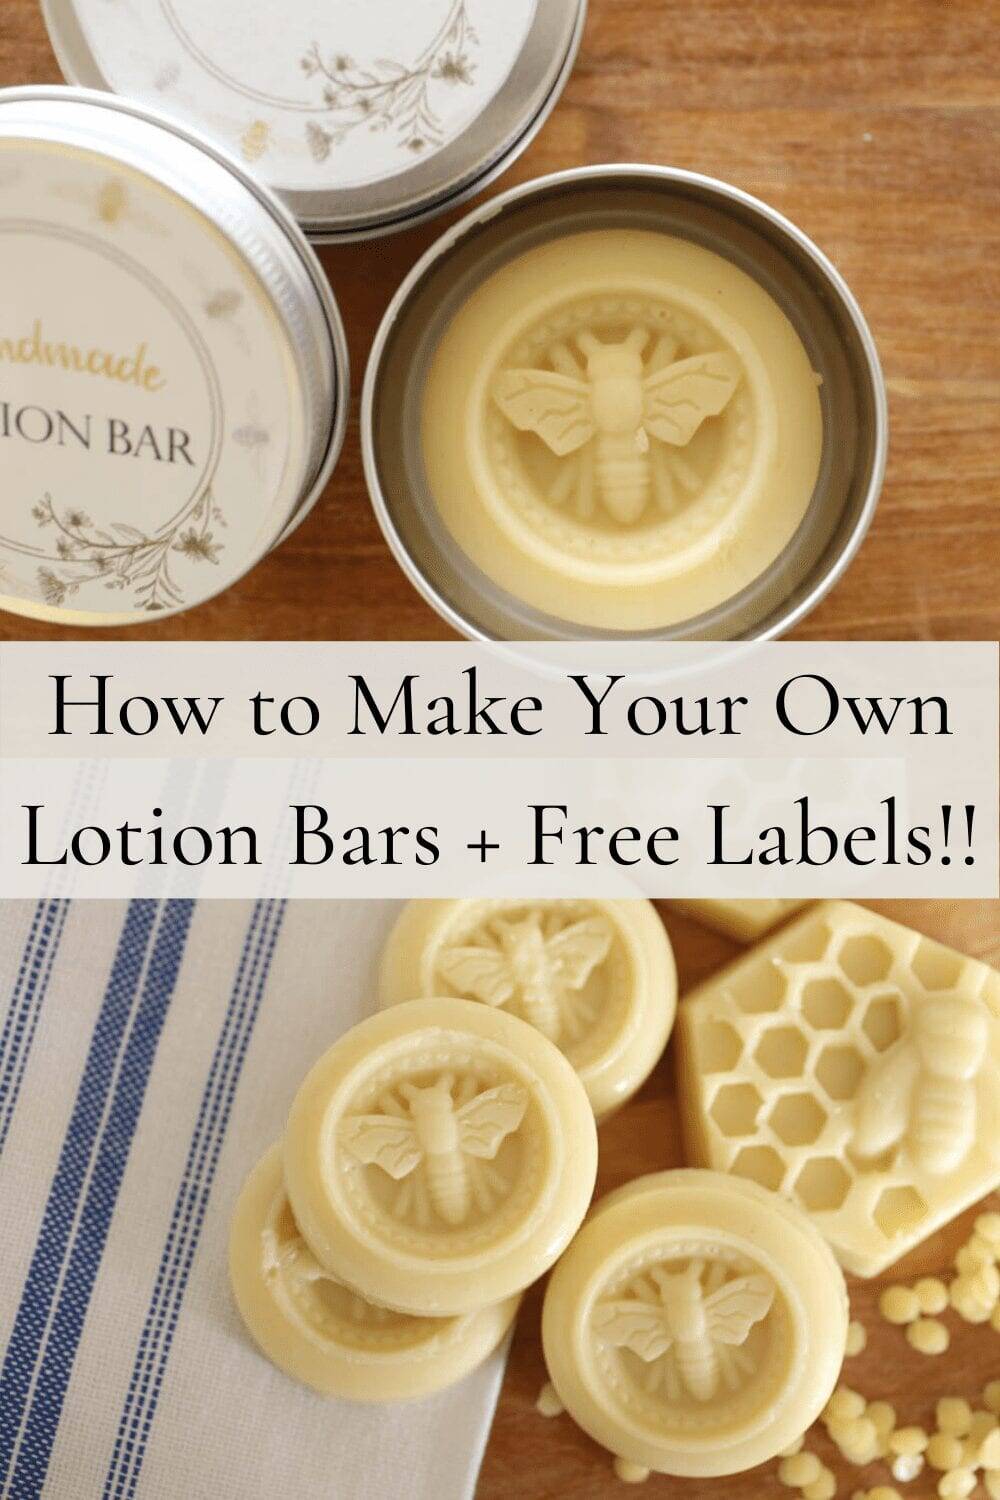 A Guide to Making Your Own Beeswax Body Lotion Bar - Cosy Owl